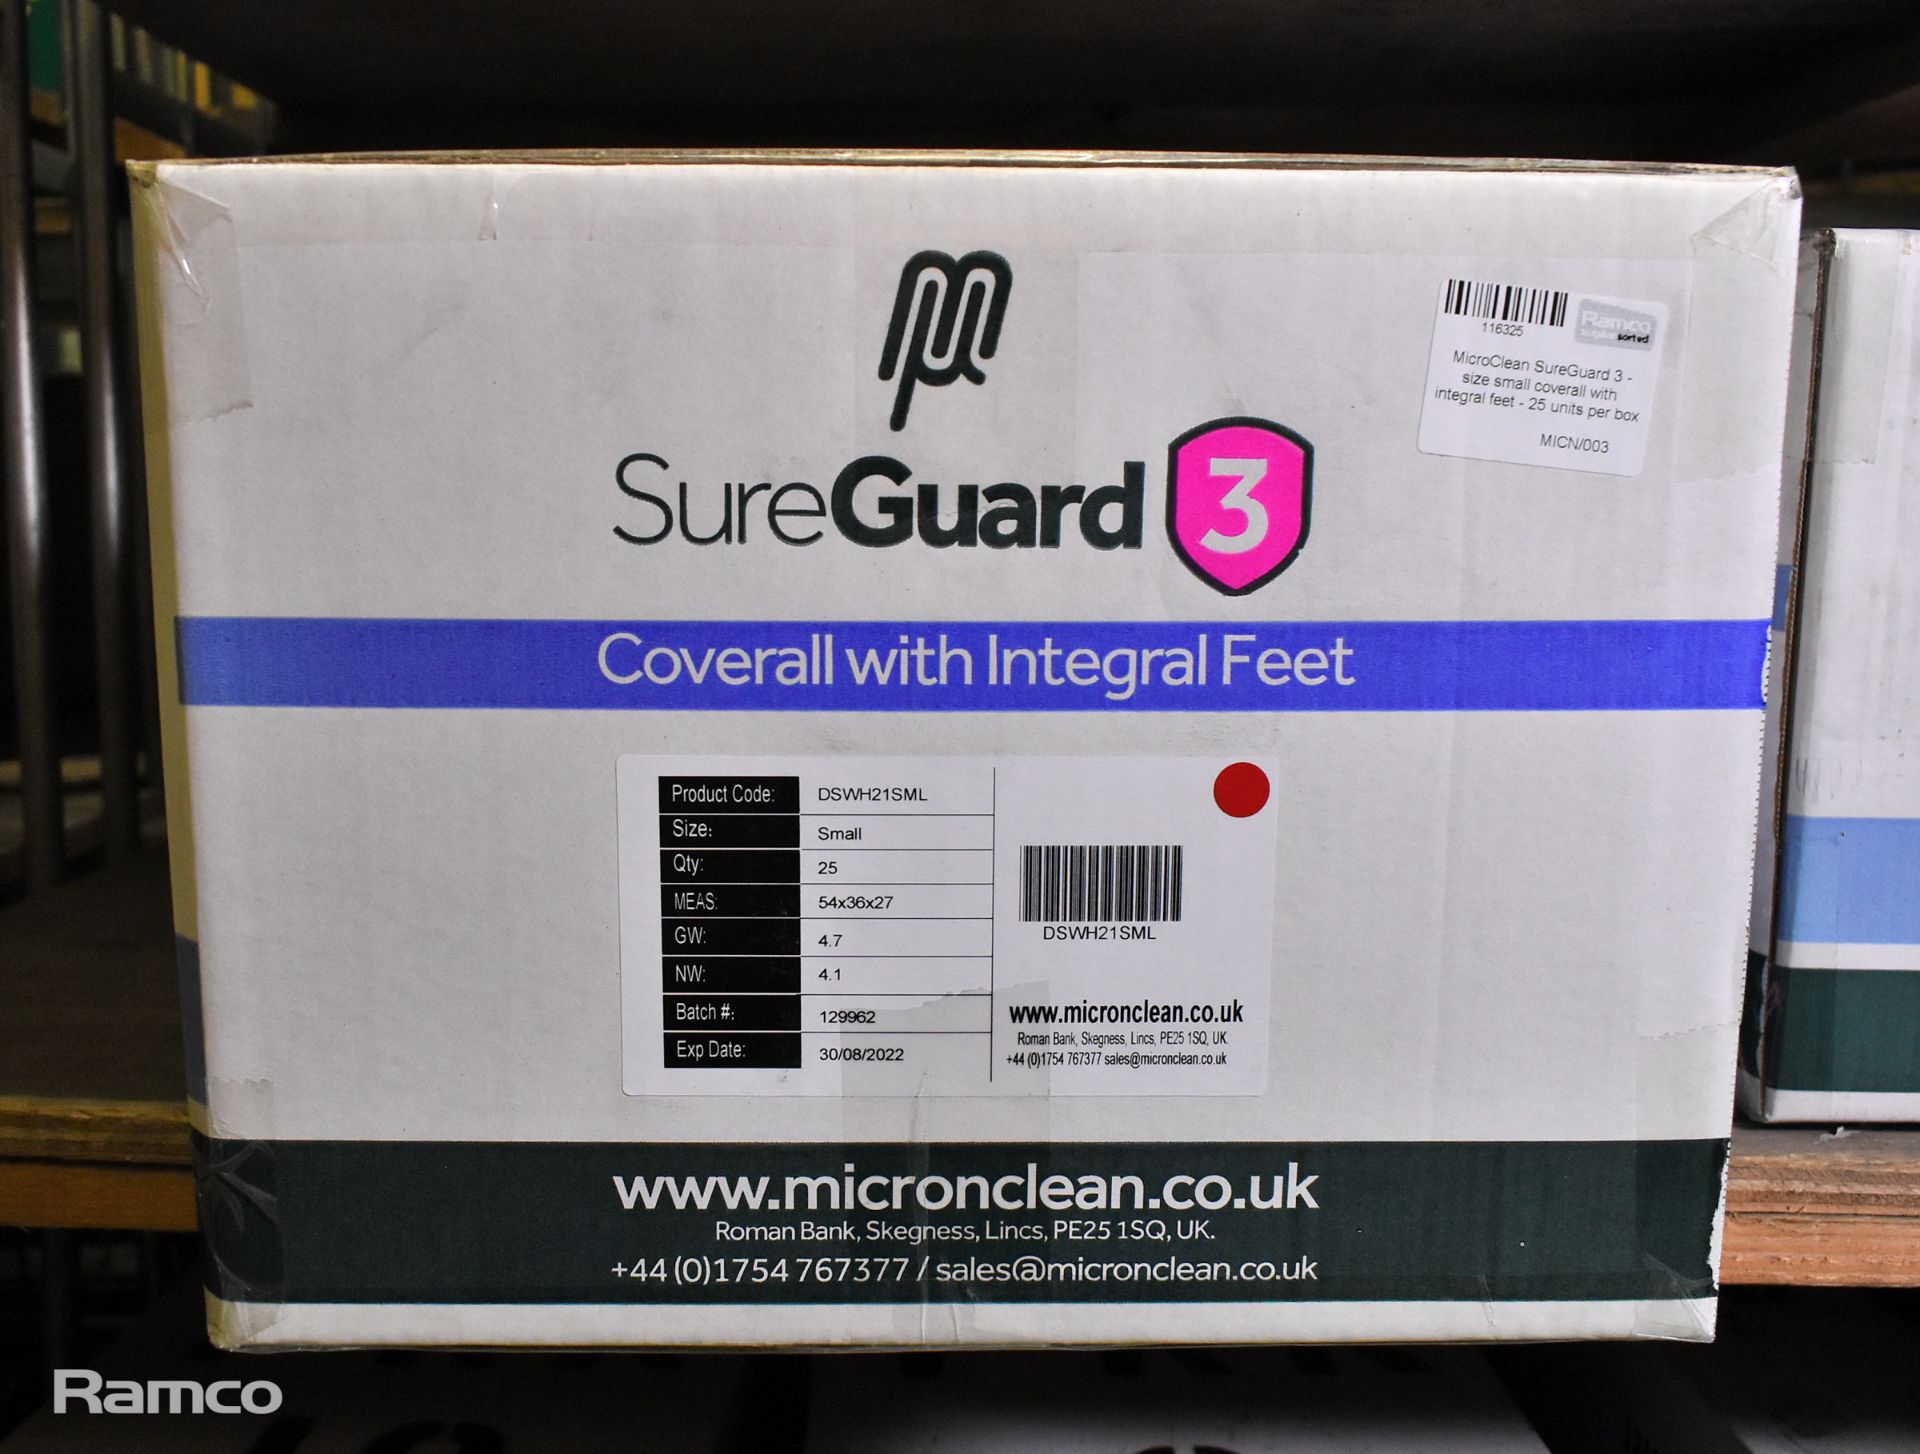 6x boxes of MicroClean SureGuard 3 - size small coveralls with integral feet - 25 units per box - Image 2 of 3